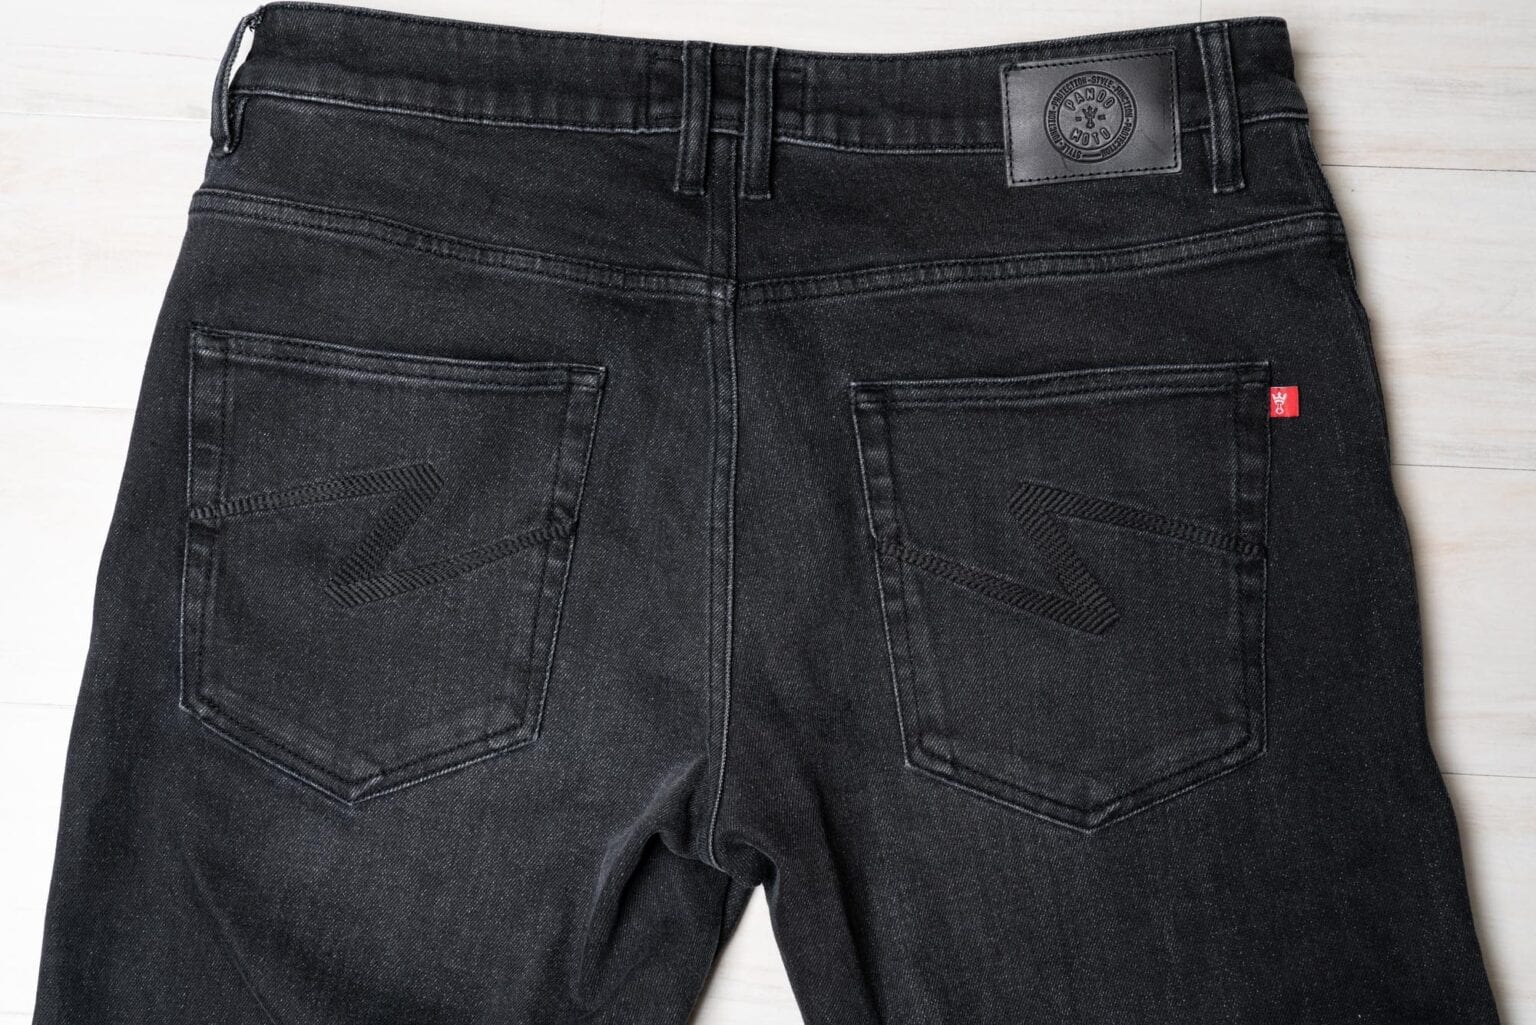 [REVIEW] Pando Moto Robby Arm Jeans | Return of the Cafe Racers